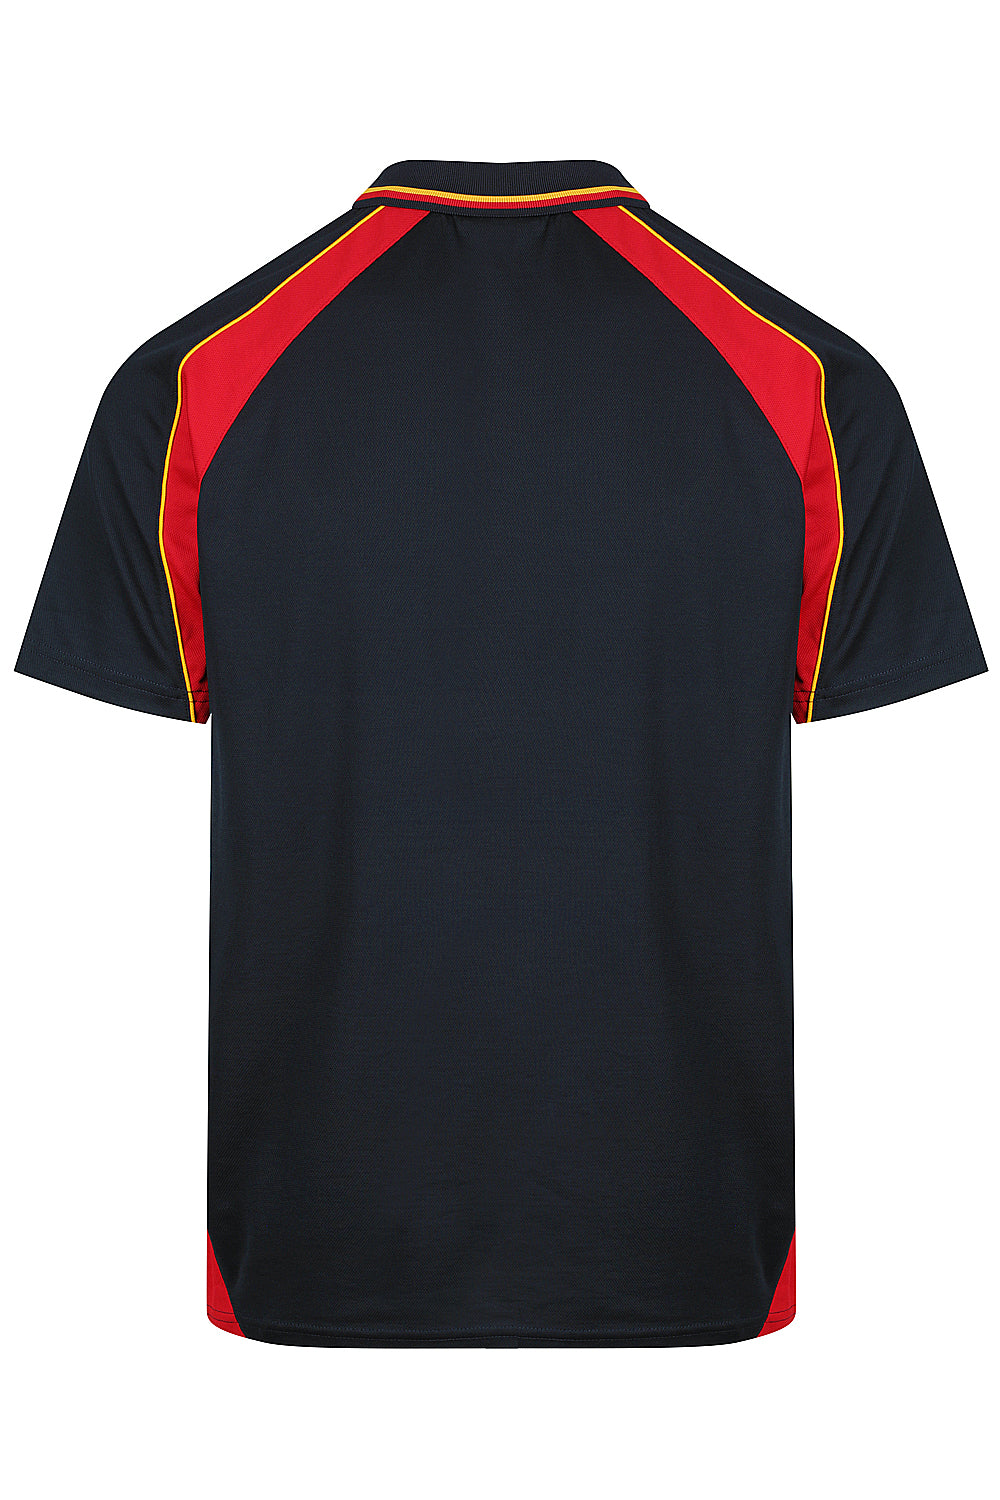 PANORAMA MENS POLOS RUNOUT - 1309-Aussie Pacific-88